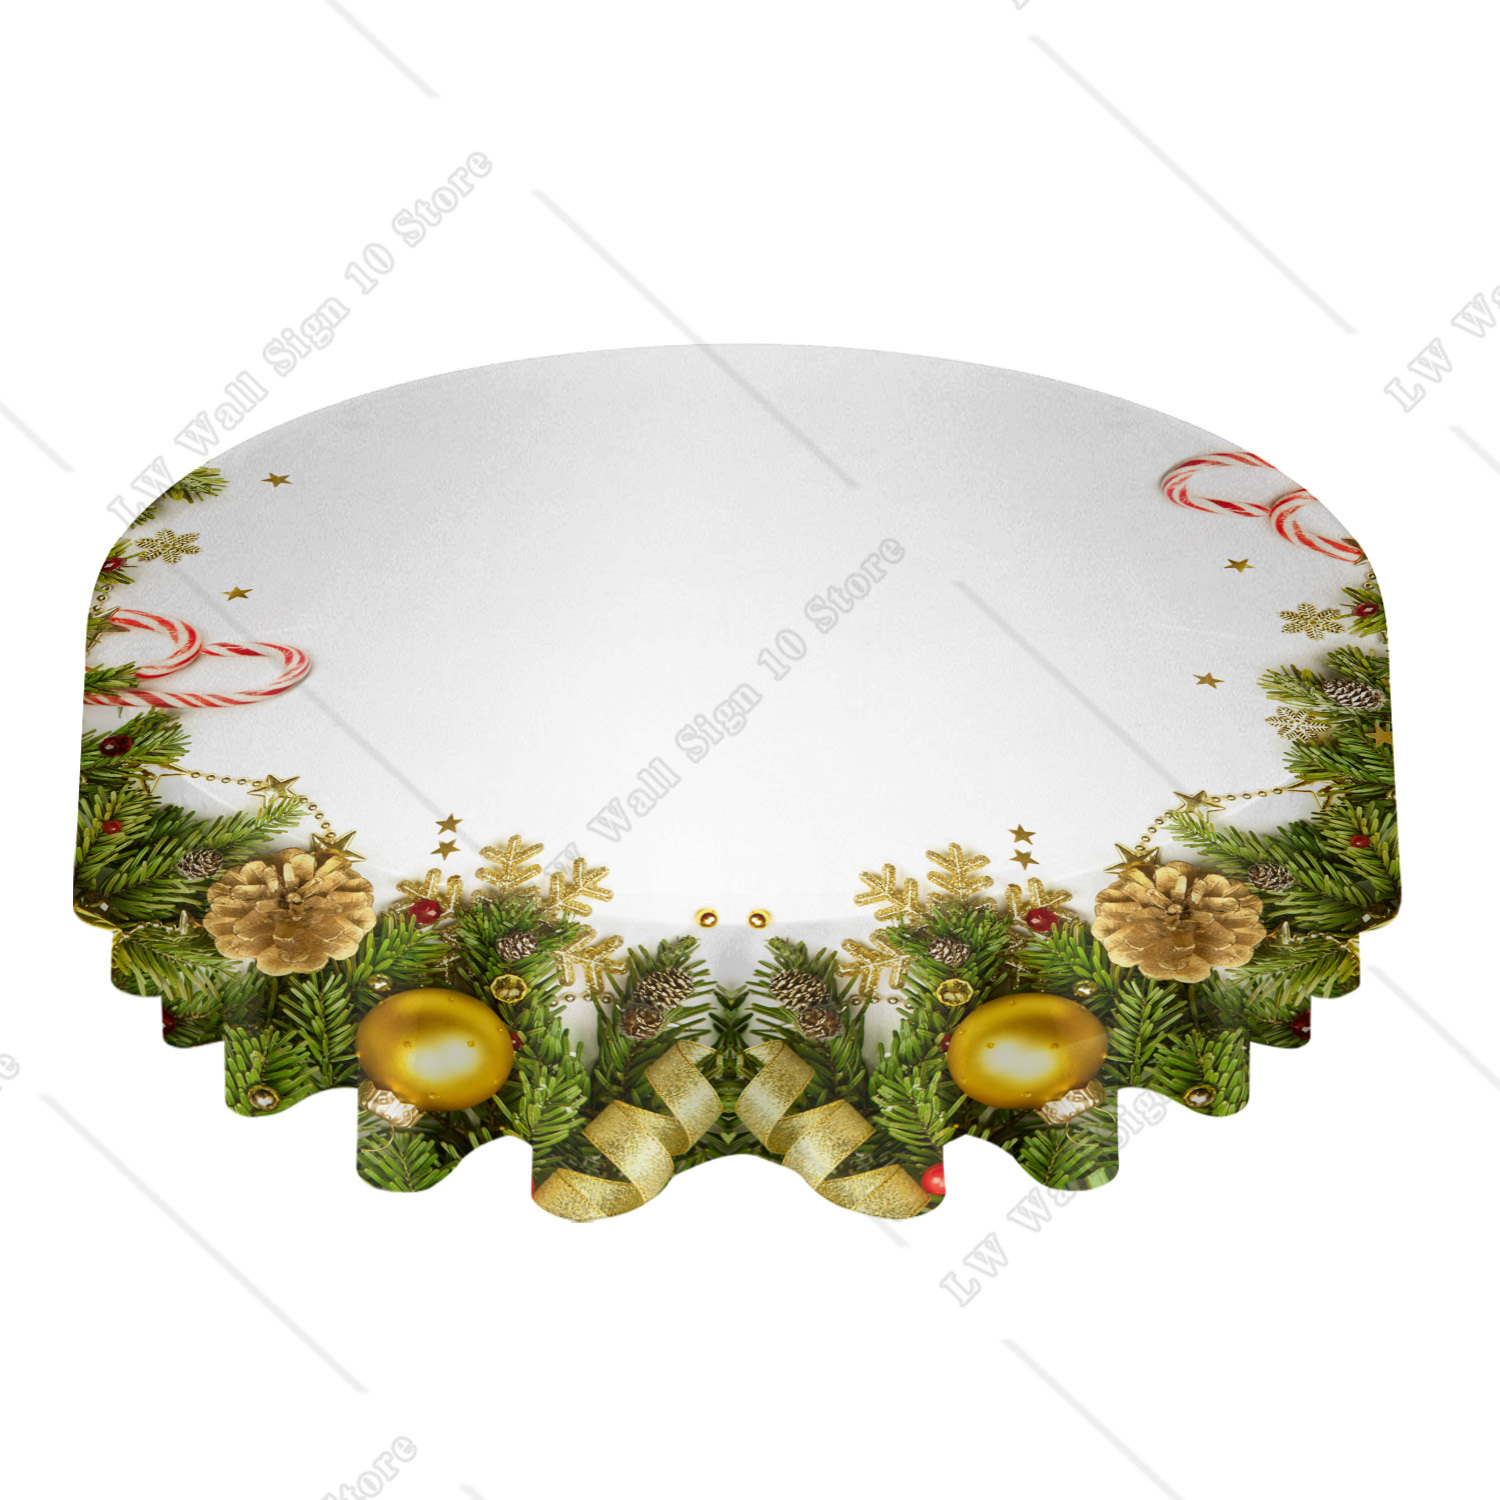 Christmas Pine Needles Lights Round Tablecloth Waterproof Wedding Party Table Cover Christmas Dining Table Tablecloth